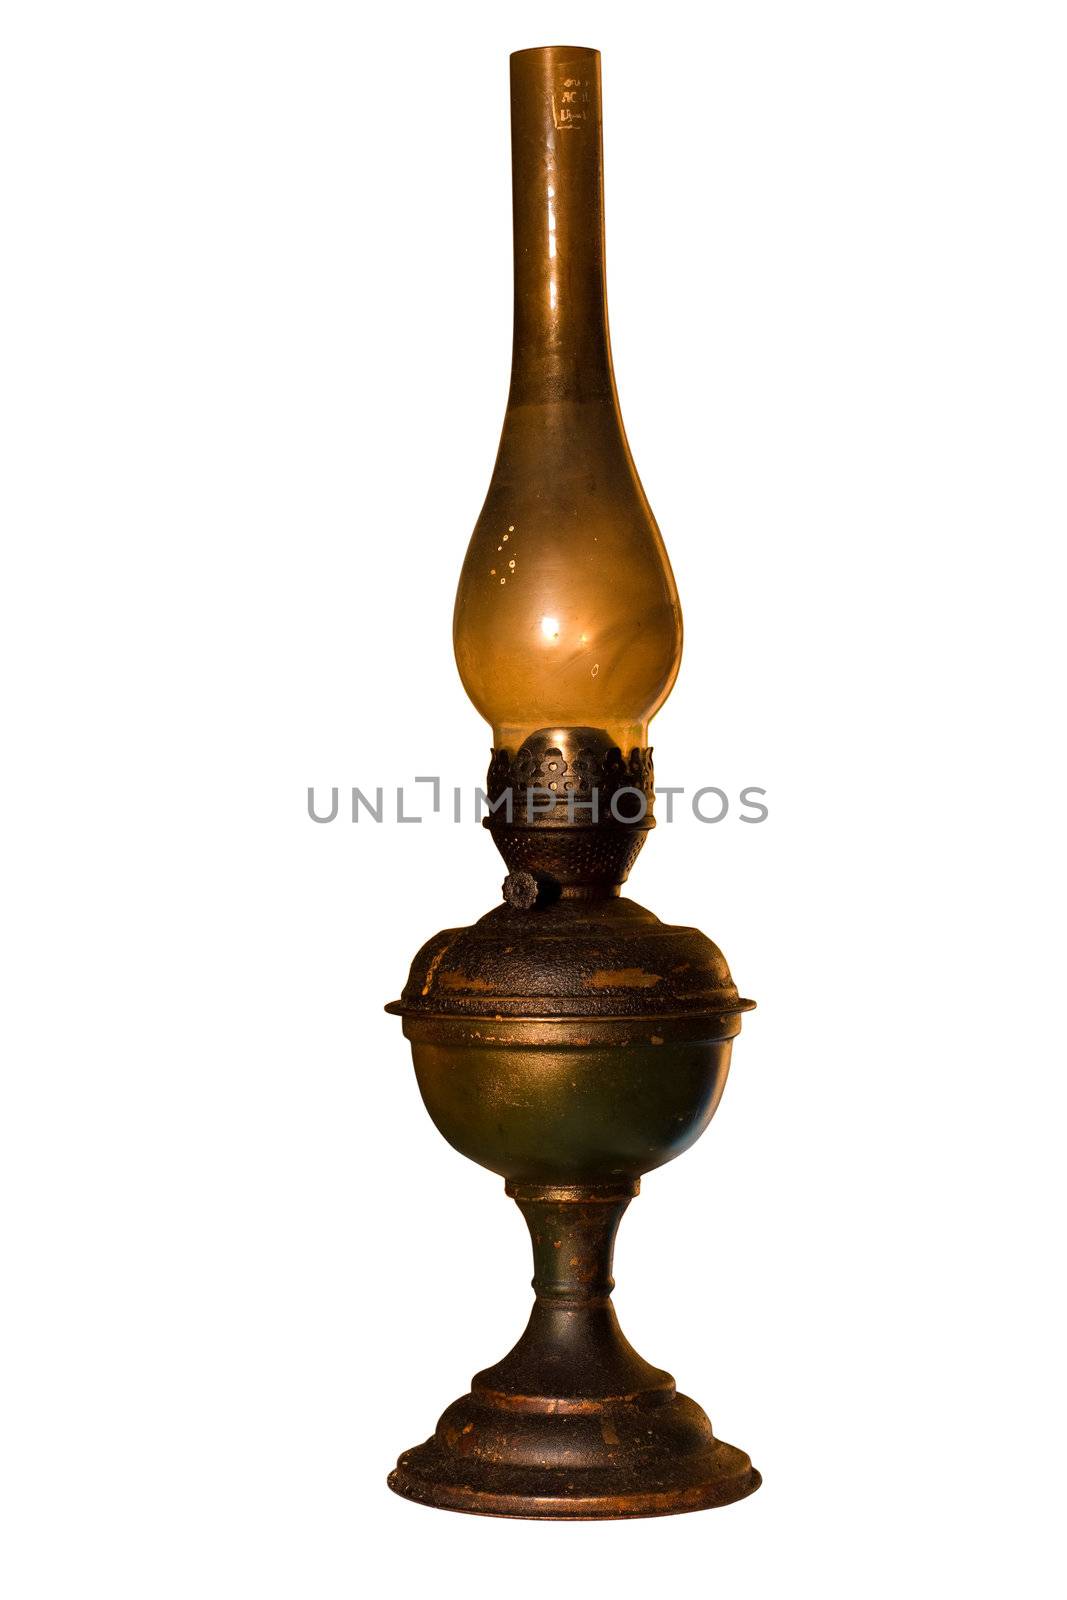 Old kerosene lamp isolated with clipping path